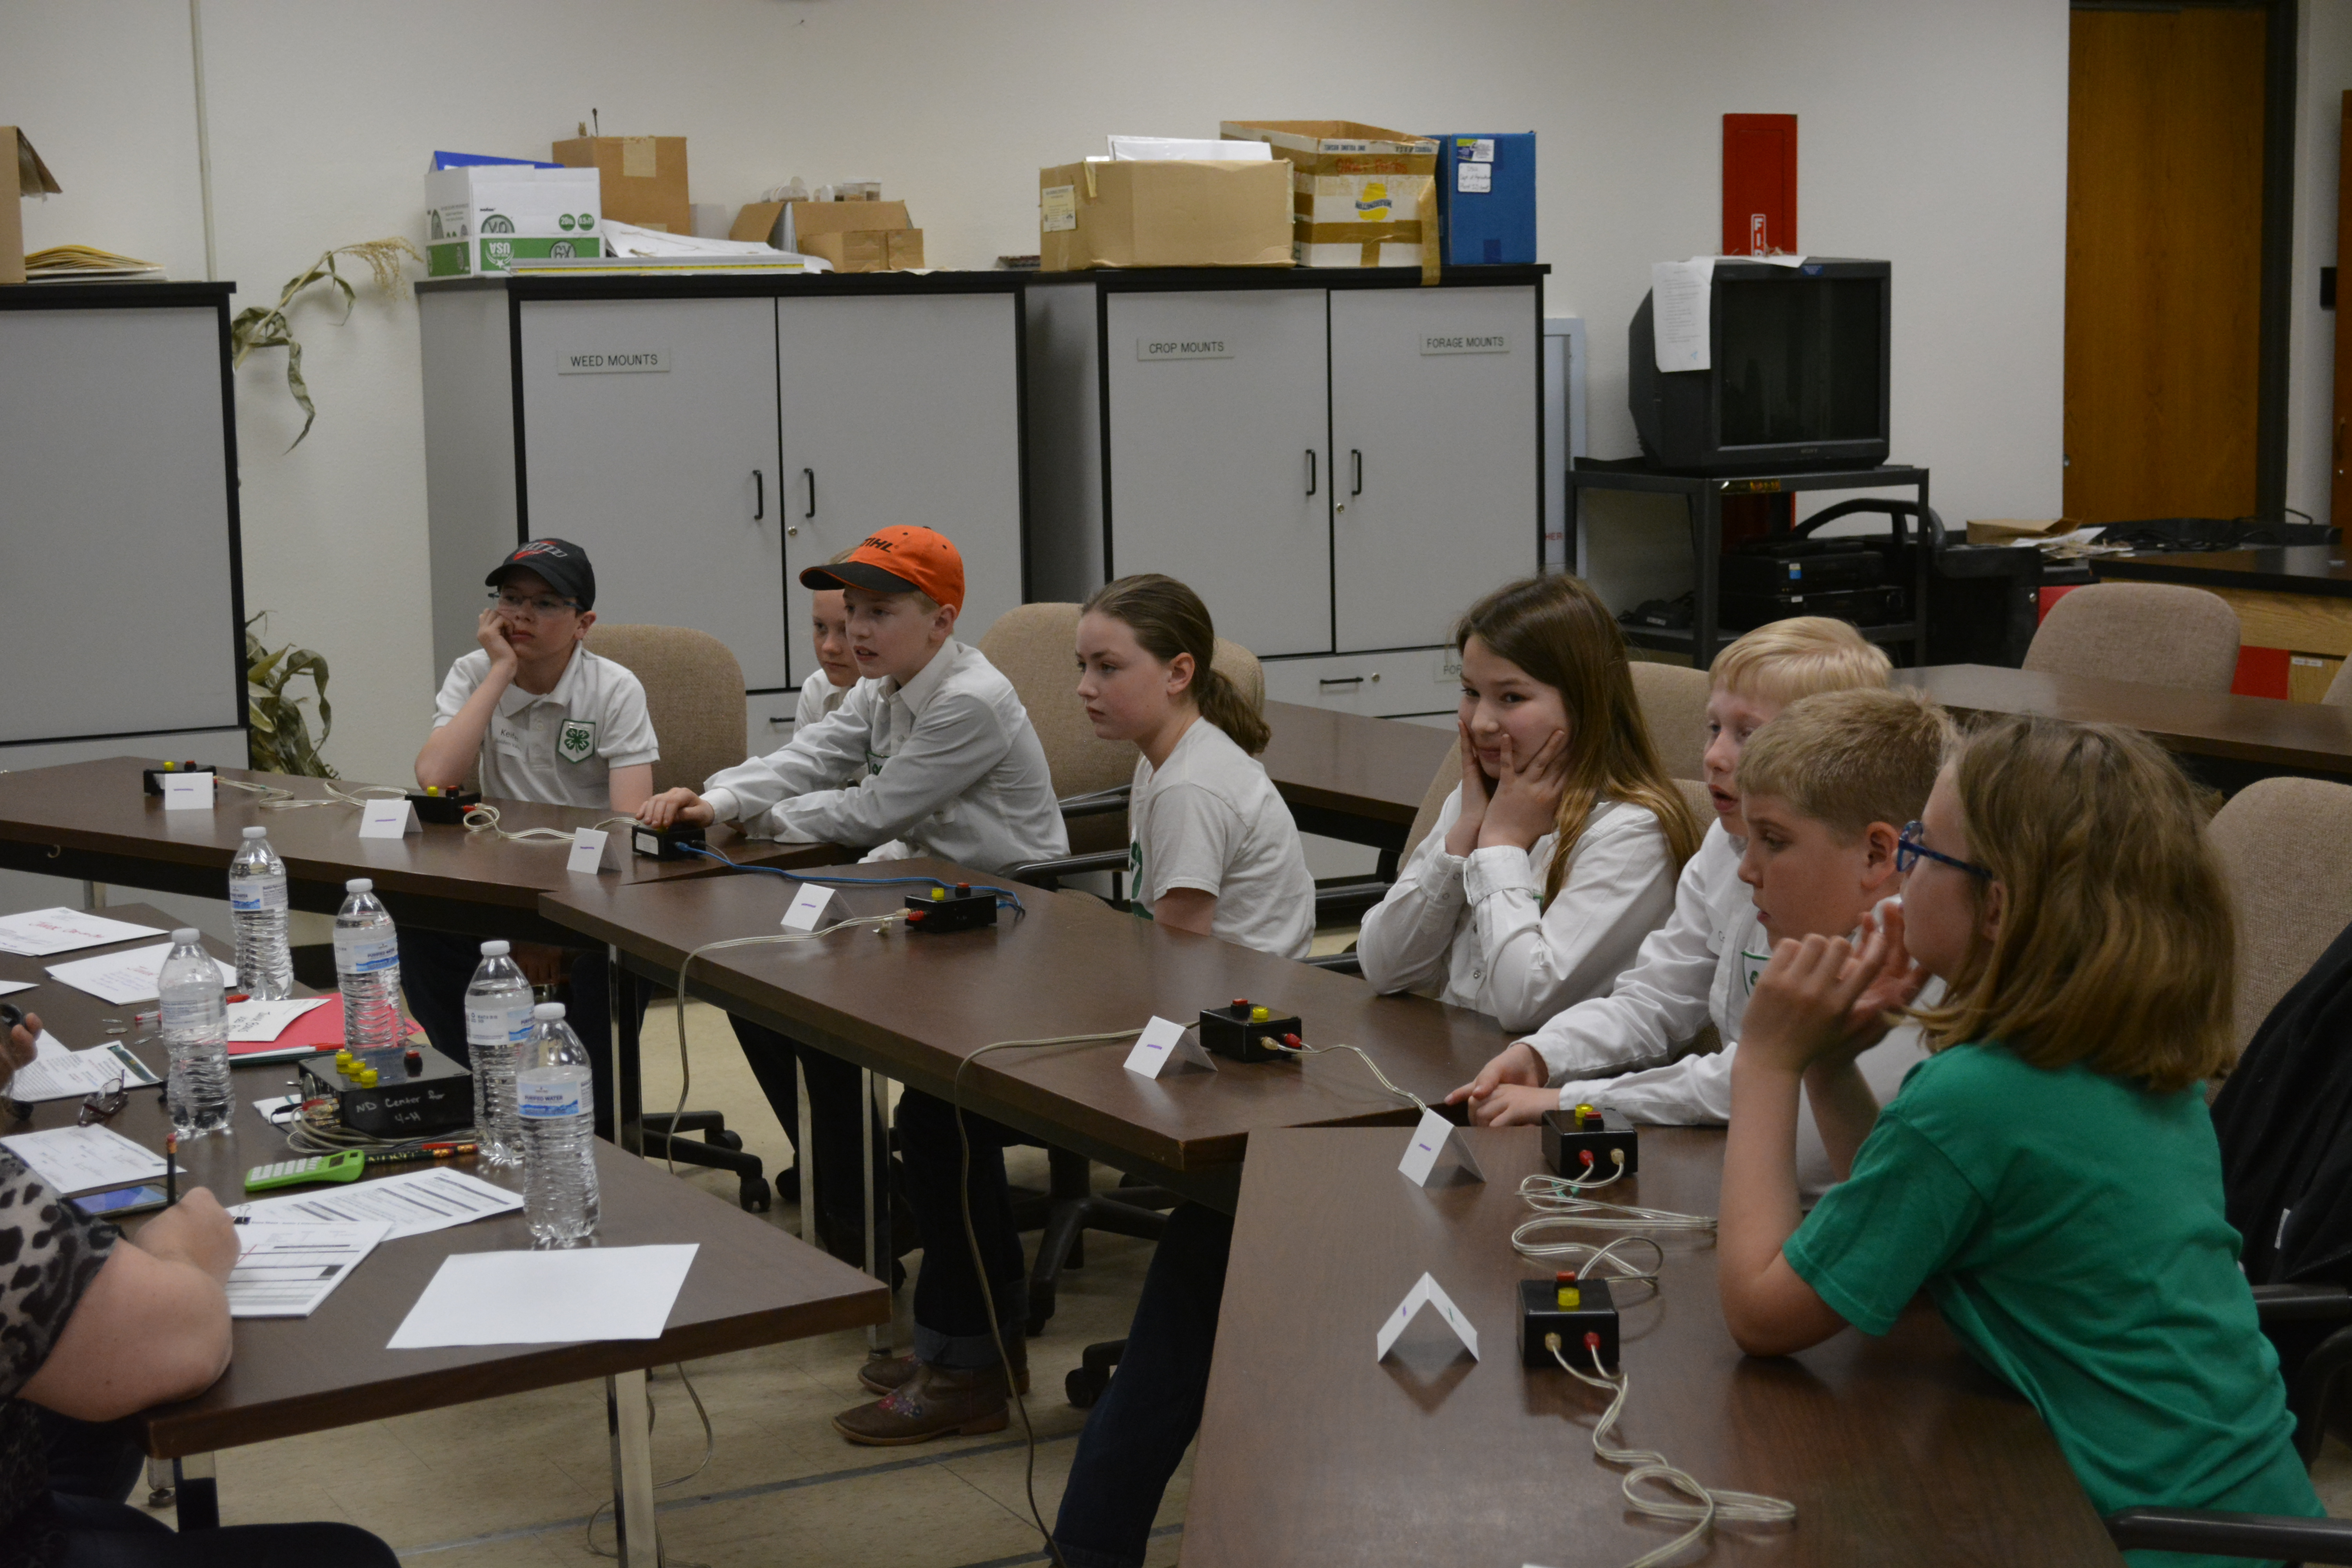 Two junior teams get ready for their first round in the inaugural State 4-H Livestock Quiz Bowl. Pictured are (from left): Golden Valley County team members Kieffer Ernst, Harley Feiring, Lucas Brown and Leah Davidson, and Stark/Billings County team members Shaylynn Berthold, Coy Melchior, Trevor Lefor and Hadley Talkington. (NDSU photo)